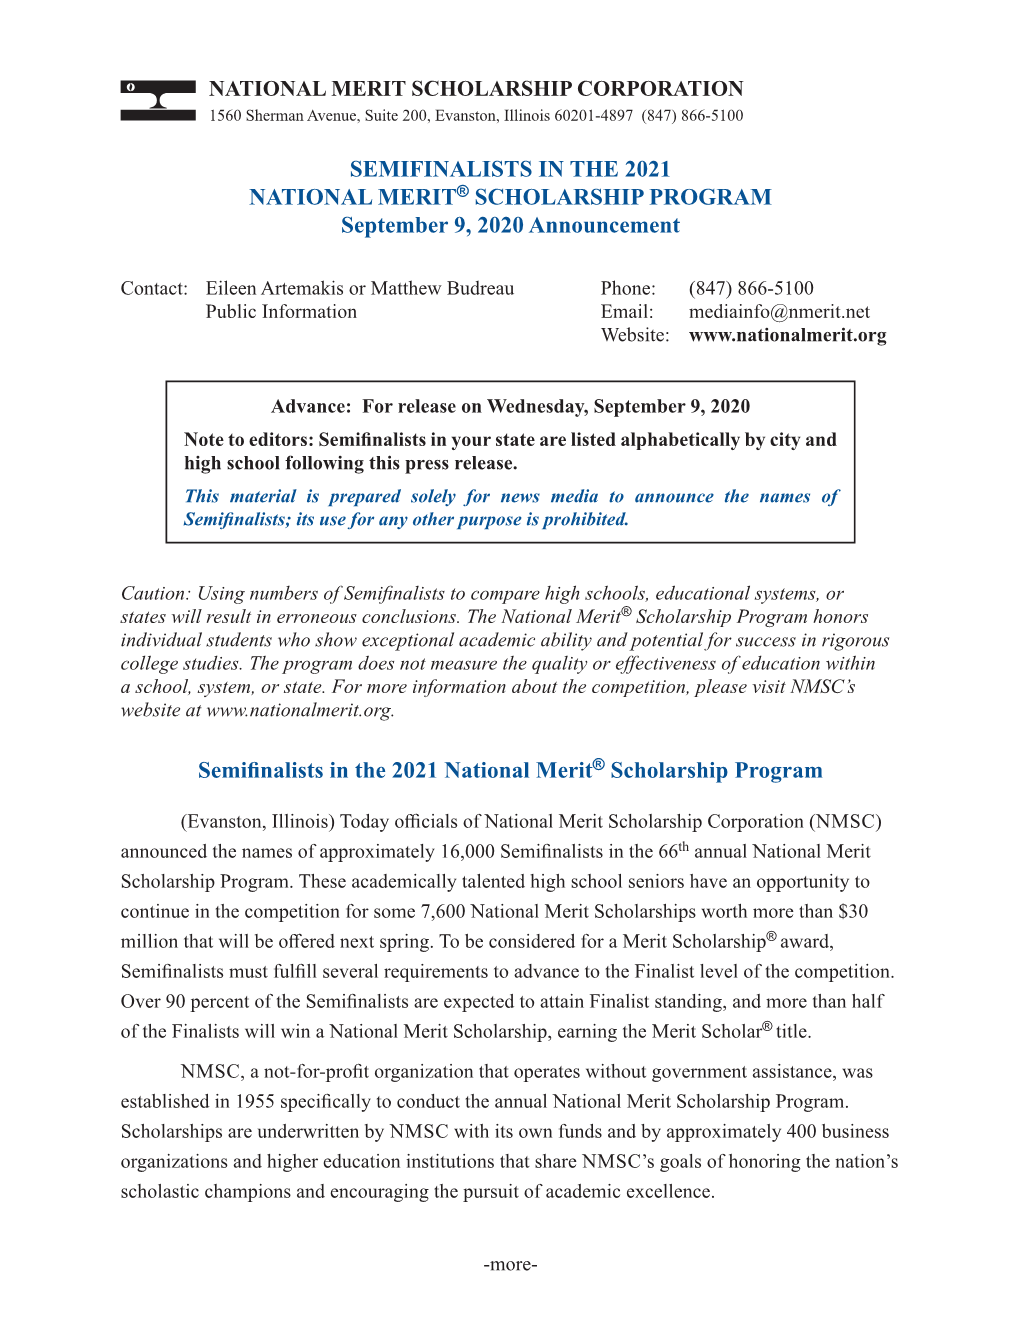 See the News Release from National Merit Scholarship Corporation